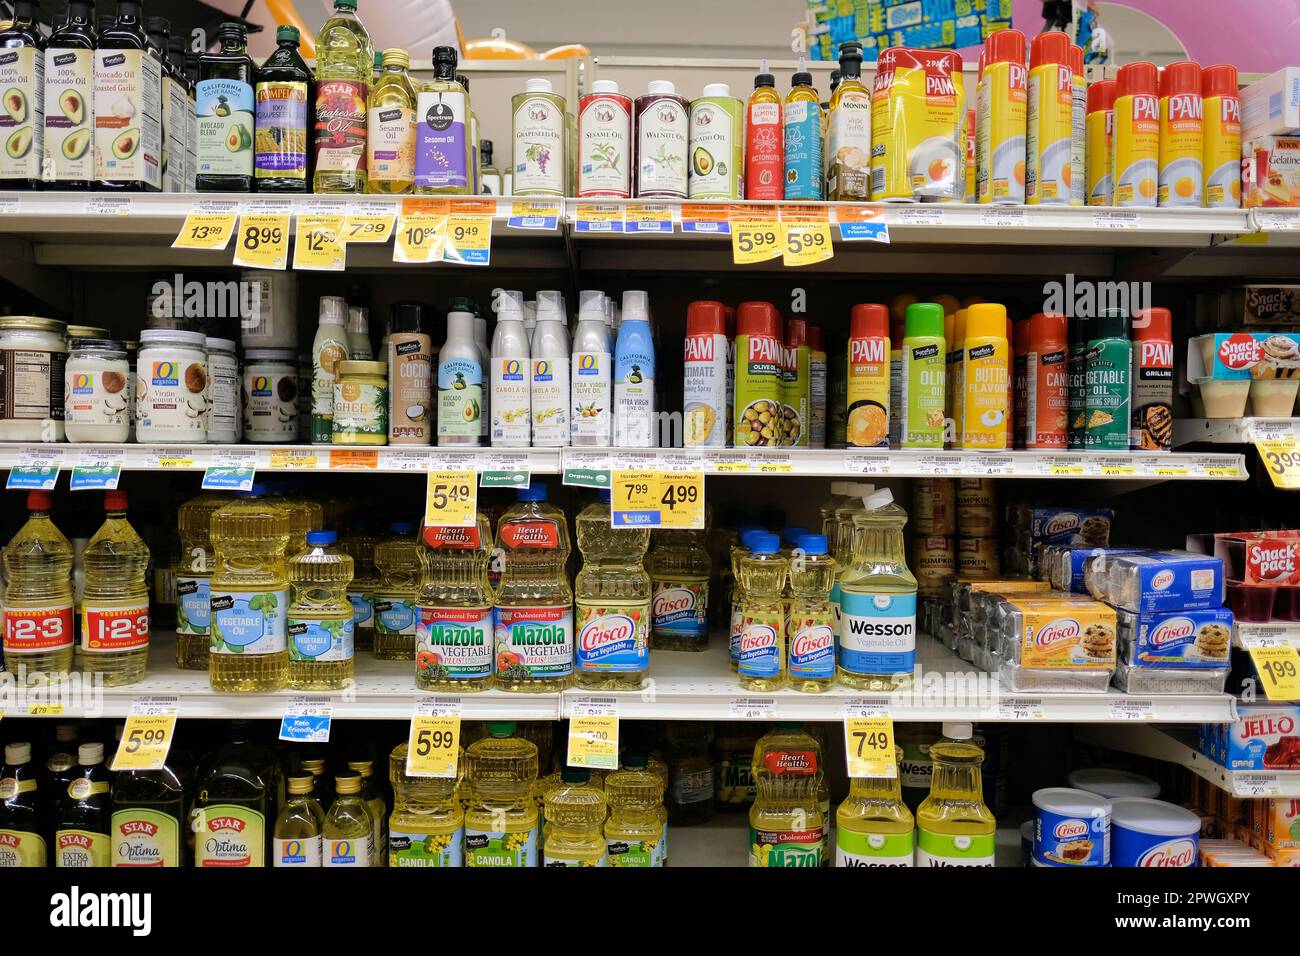 Cooking oil shelves at a Safeway grocery store with Mazola, Crisco, Wesson, Pam and Signature brands; vegetable, canola oils, cooking sprays. Stock Photo